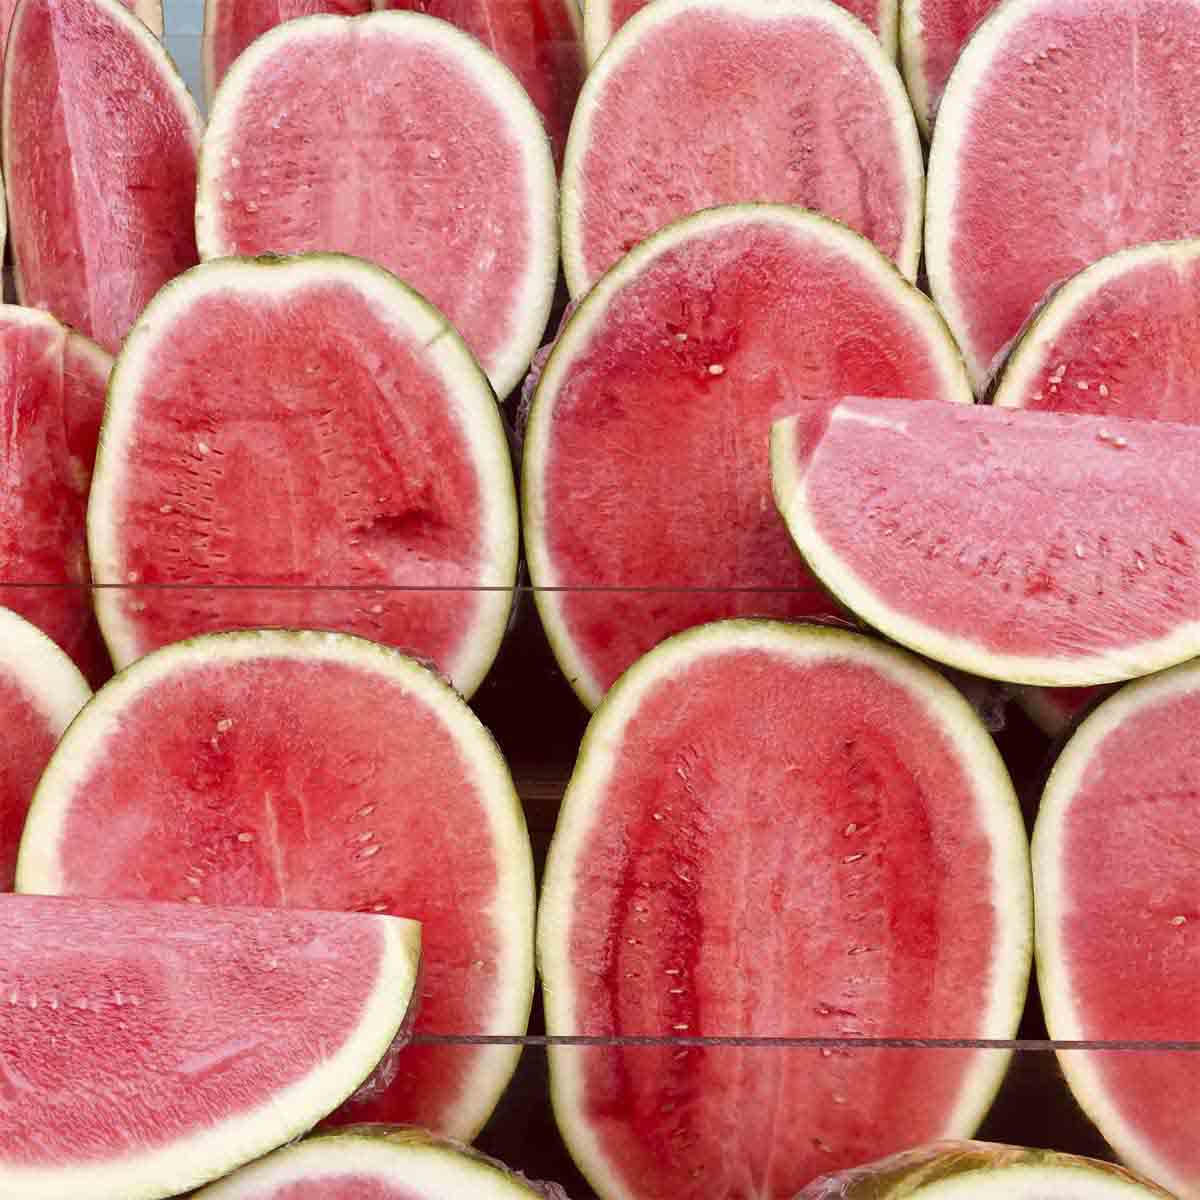 Many ripe watermelon sliced open and on display.